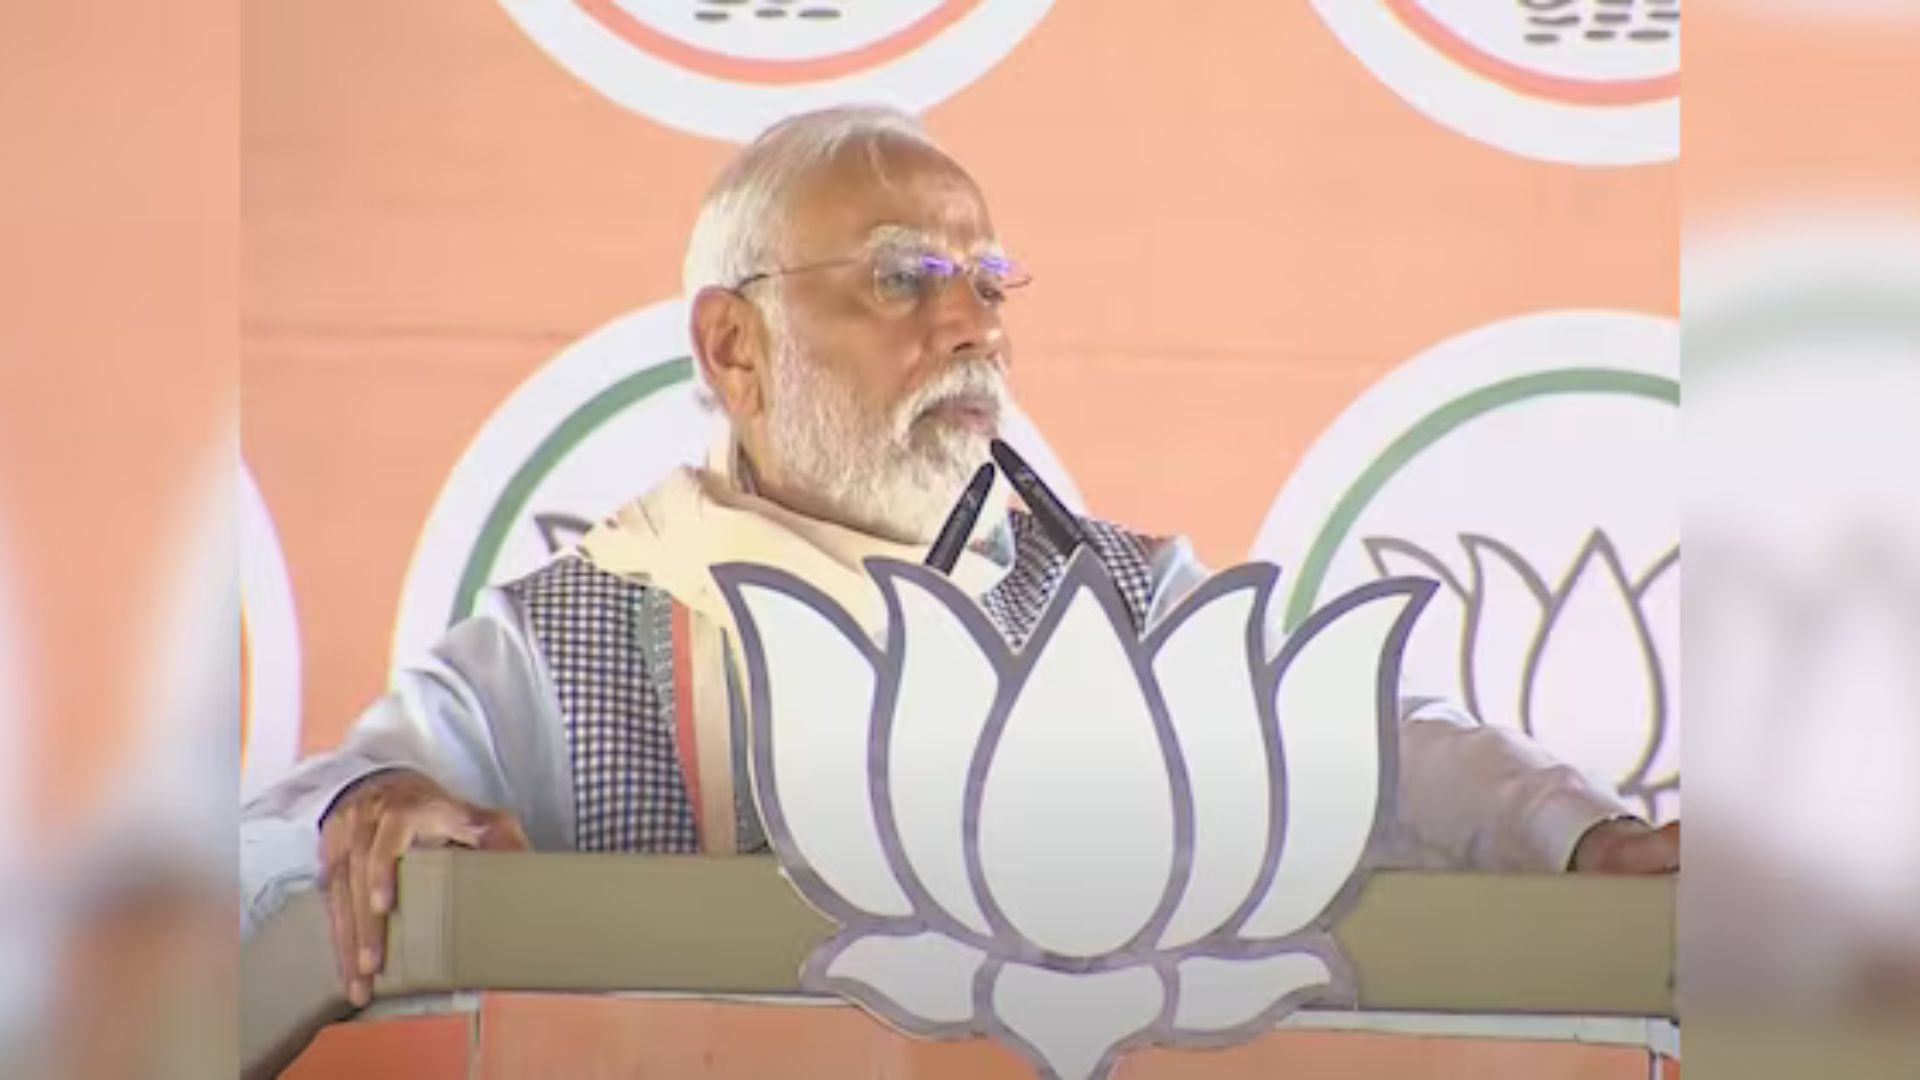 PM Modi promises to restore statehood of J&K while addressing rally in Udhampur